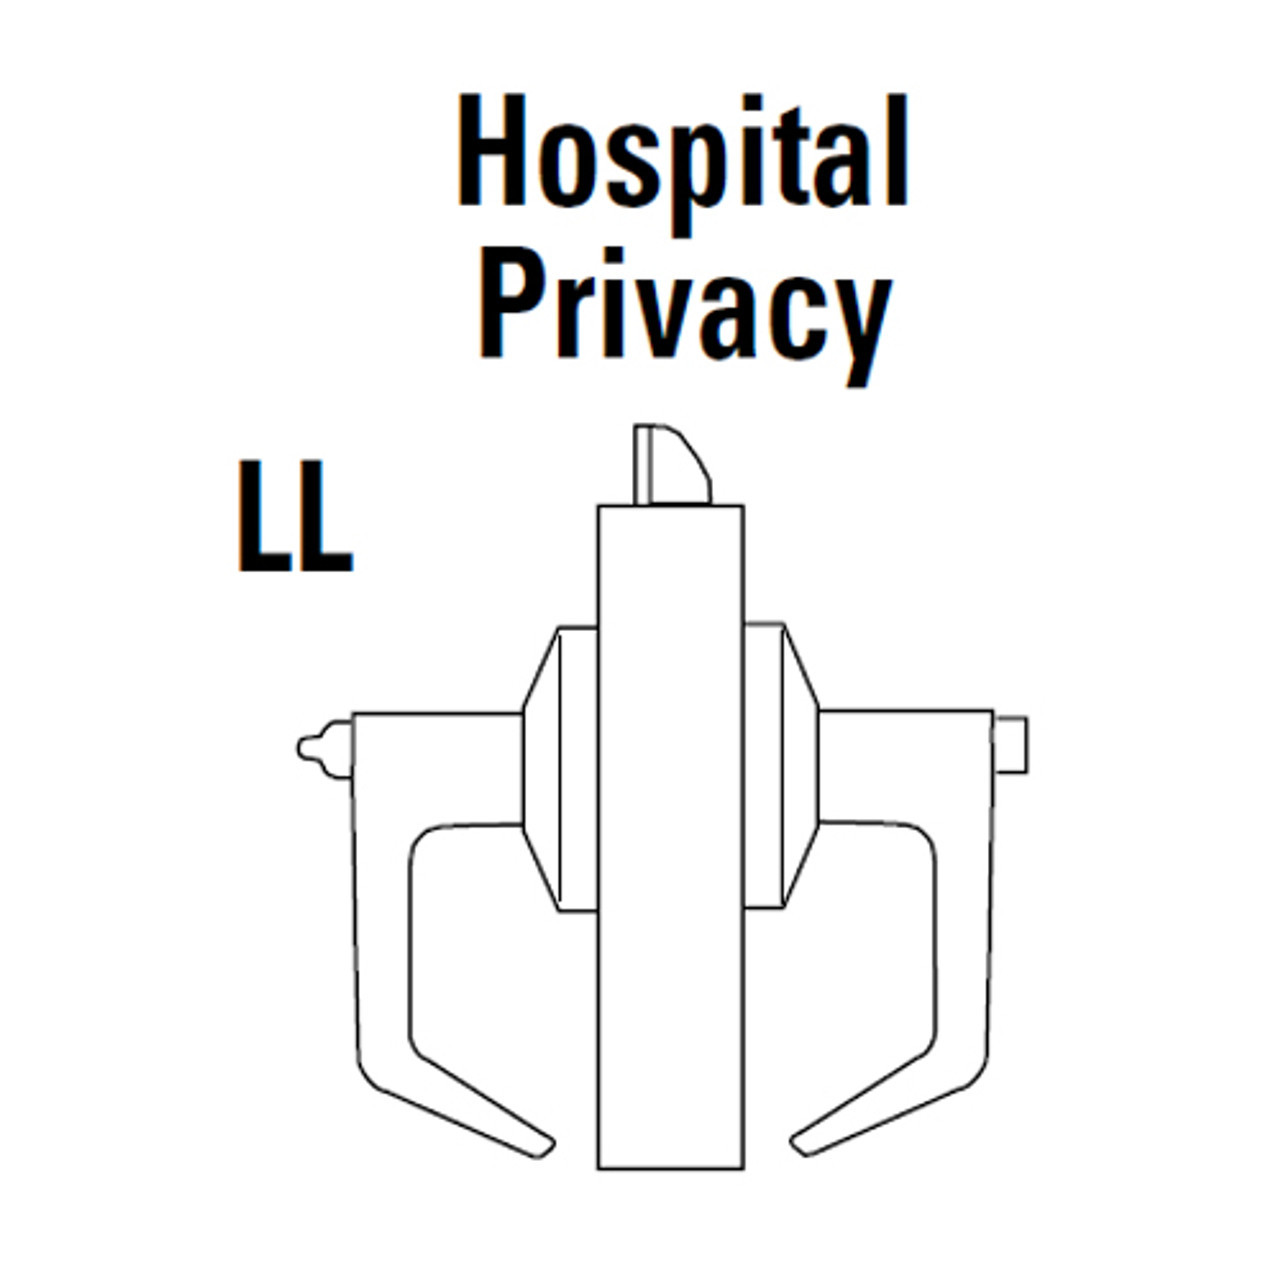 9K30LL16CSTK625LM Best 9K Series Hospital Privacy Heavy Duty Cylindrical Lever Locks with Curved Without Return Lever Design in Bright Chrome